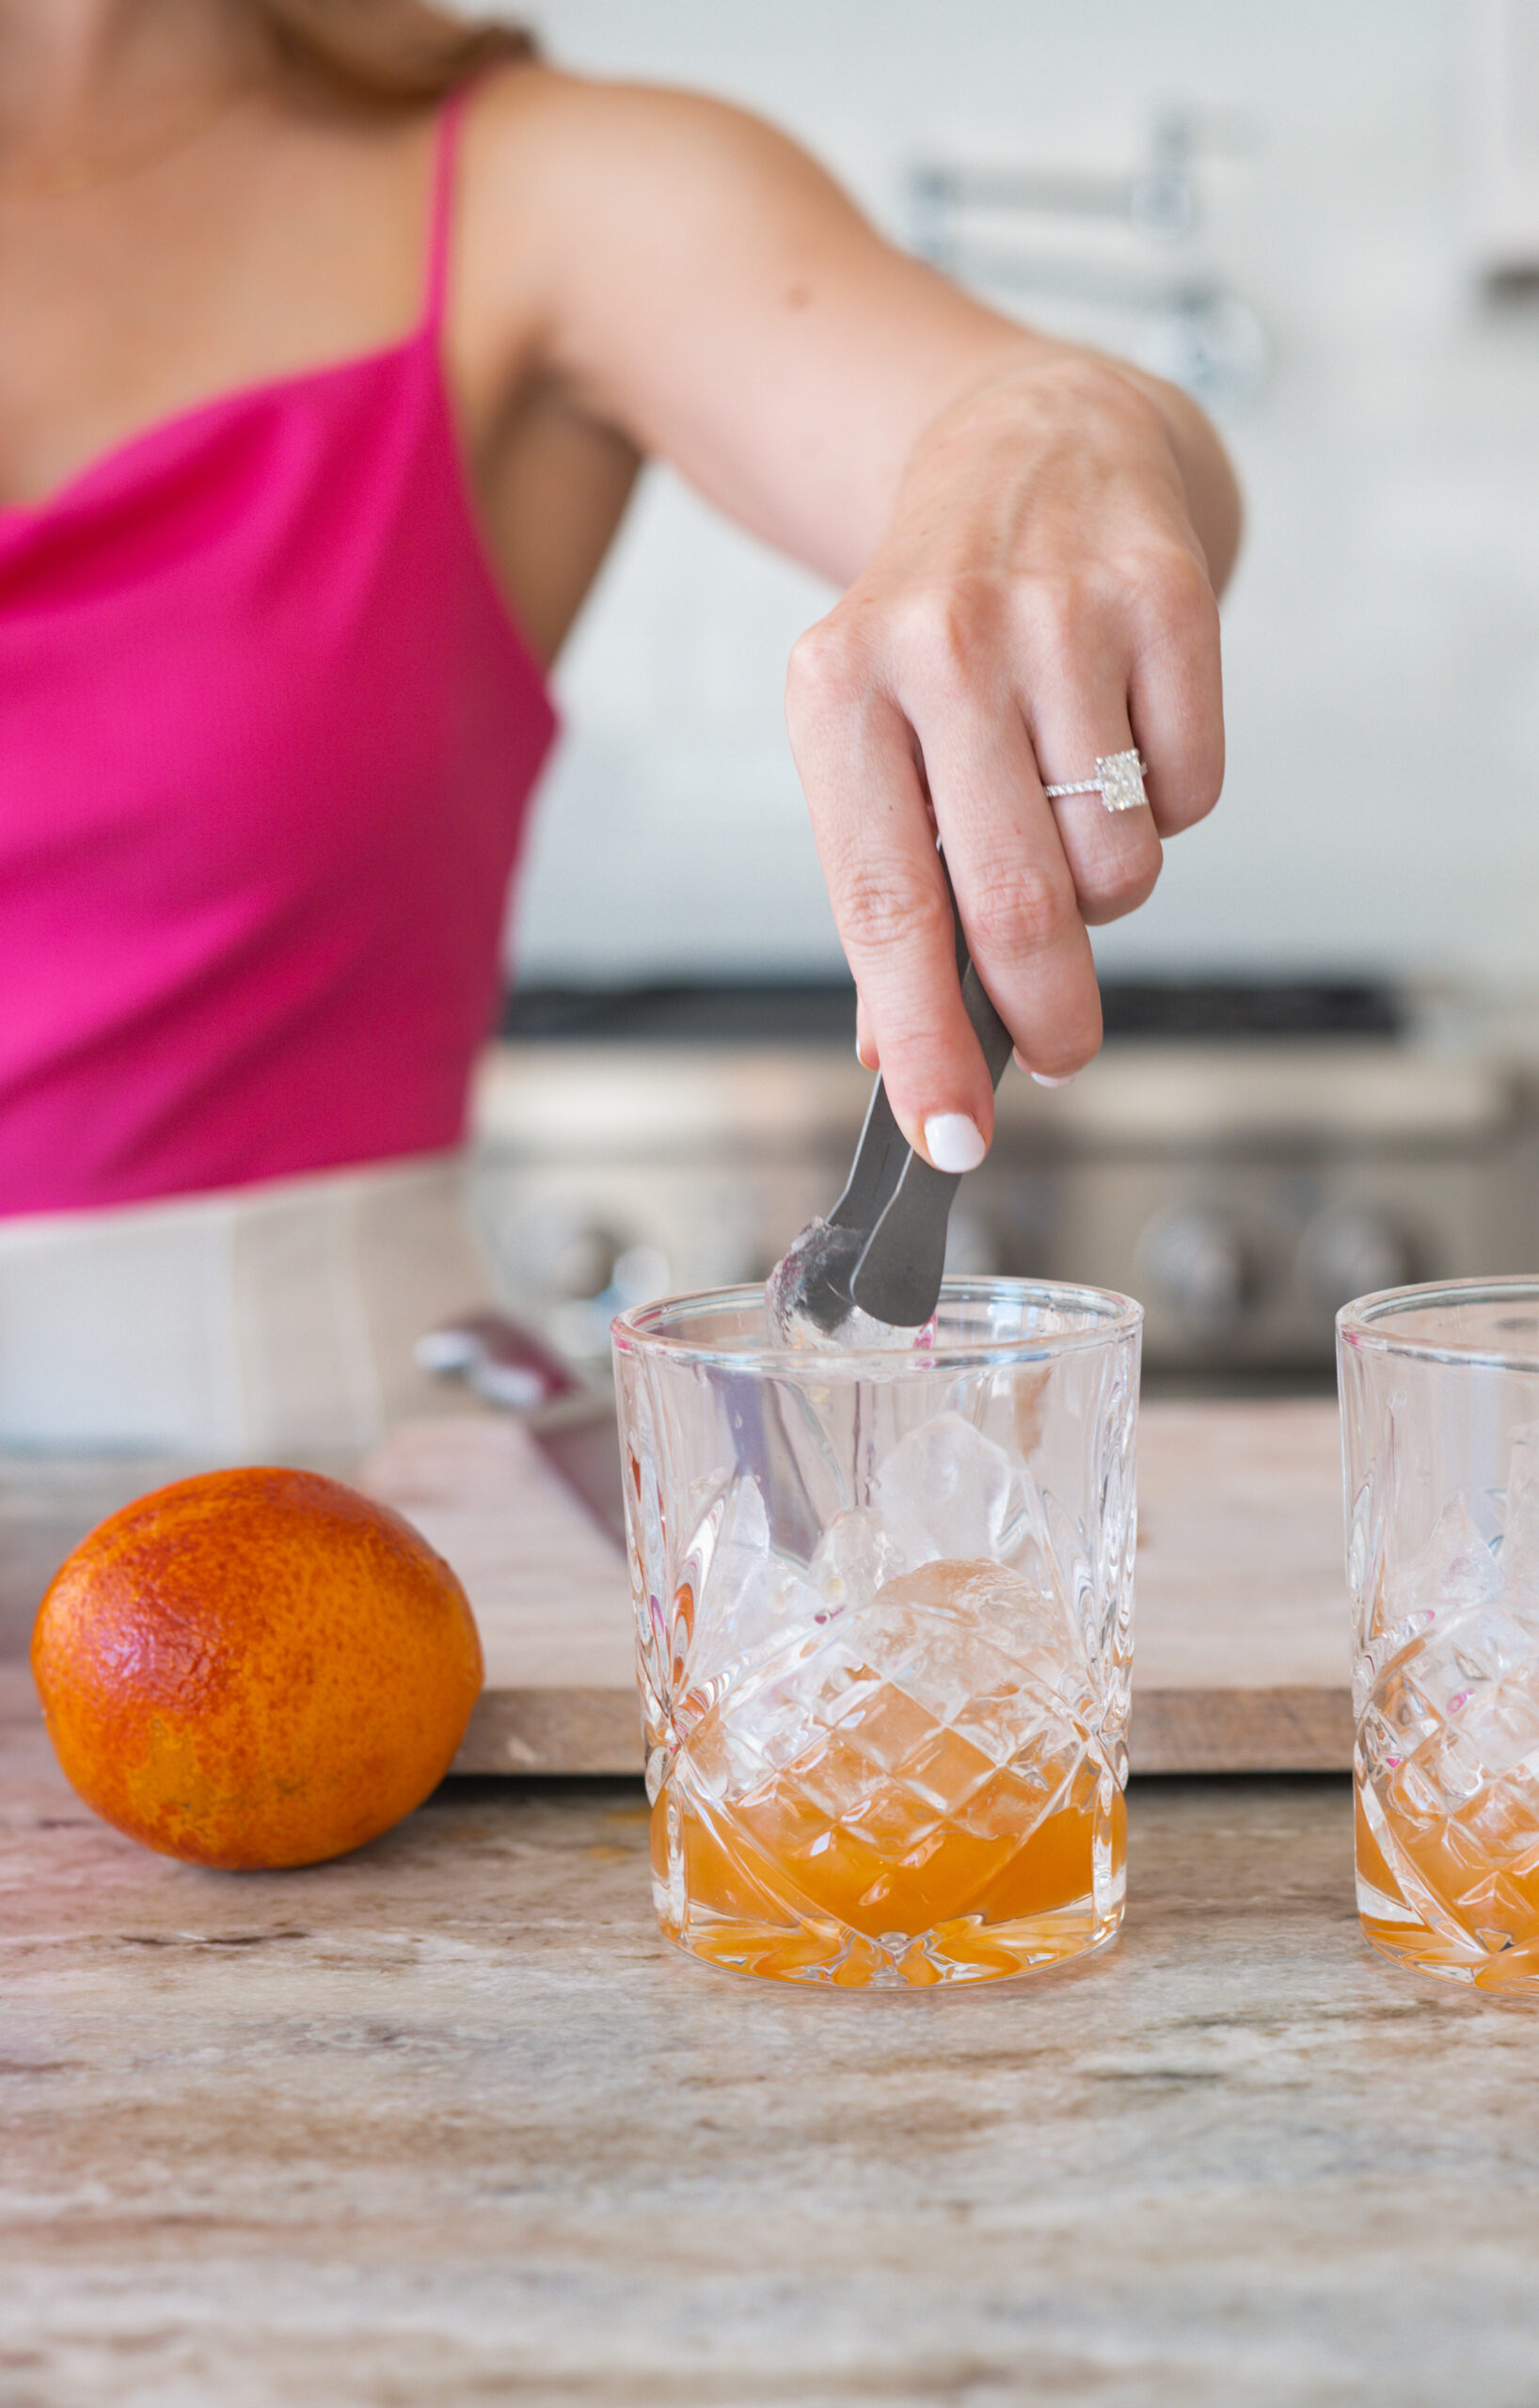 Girl holding tongs and placing an ice cube in a cocktail glass.